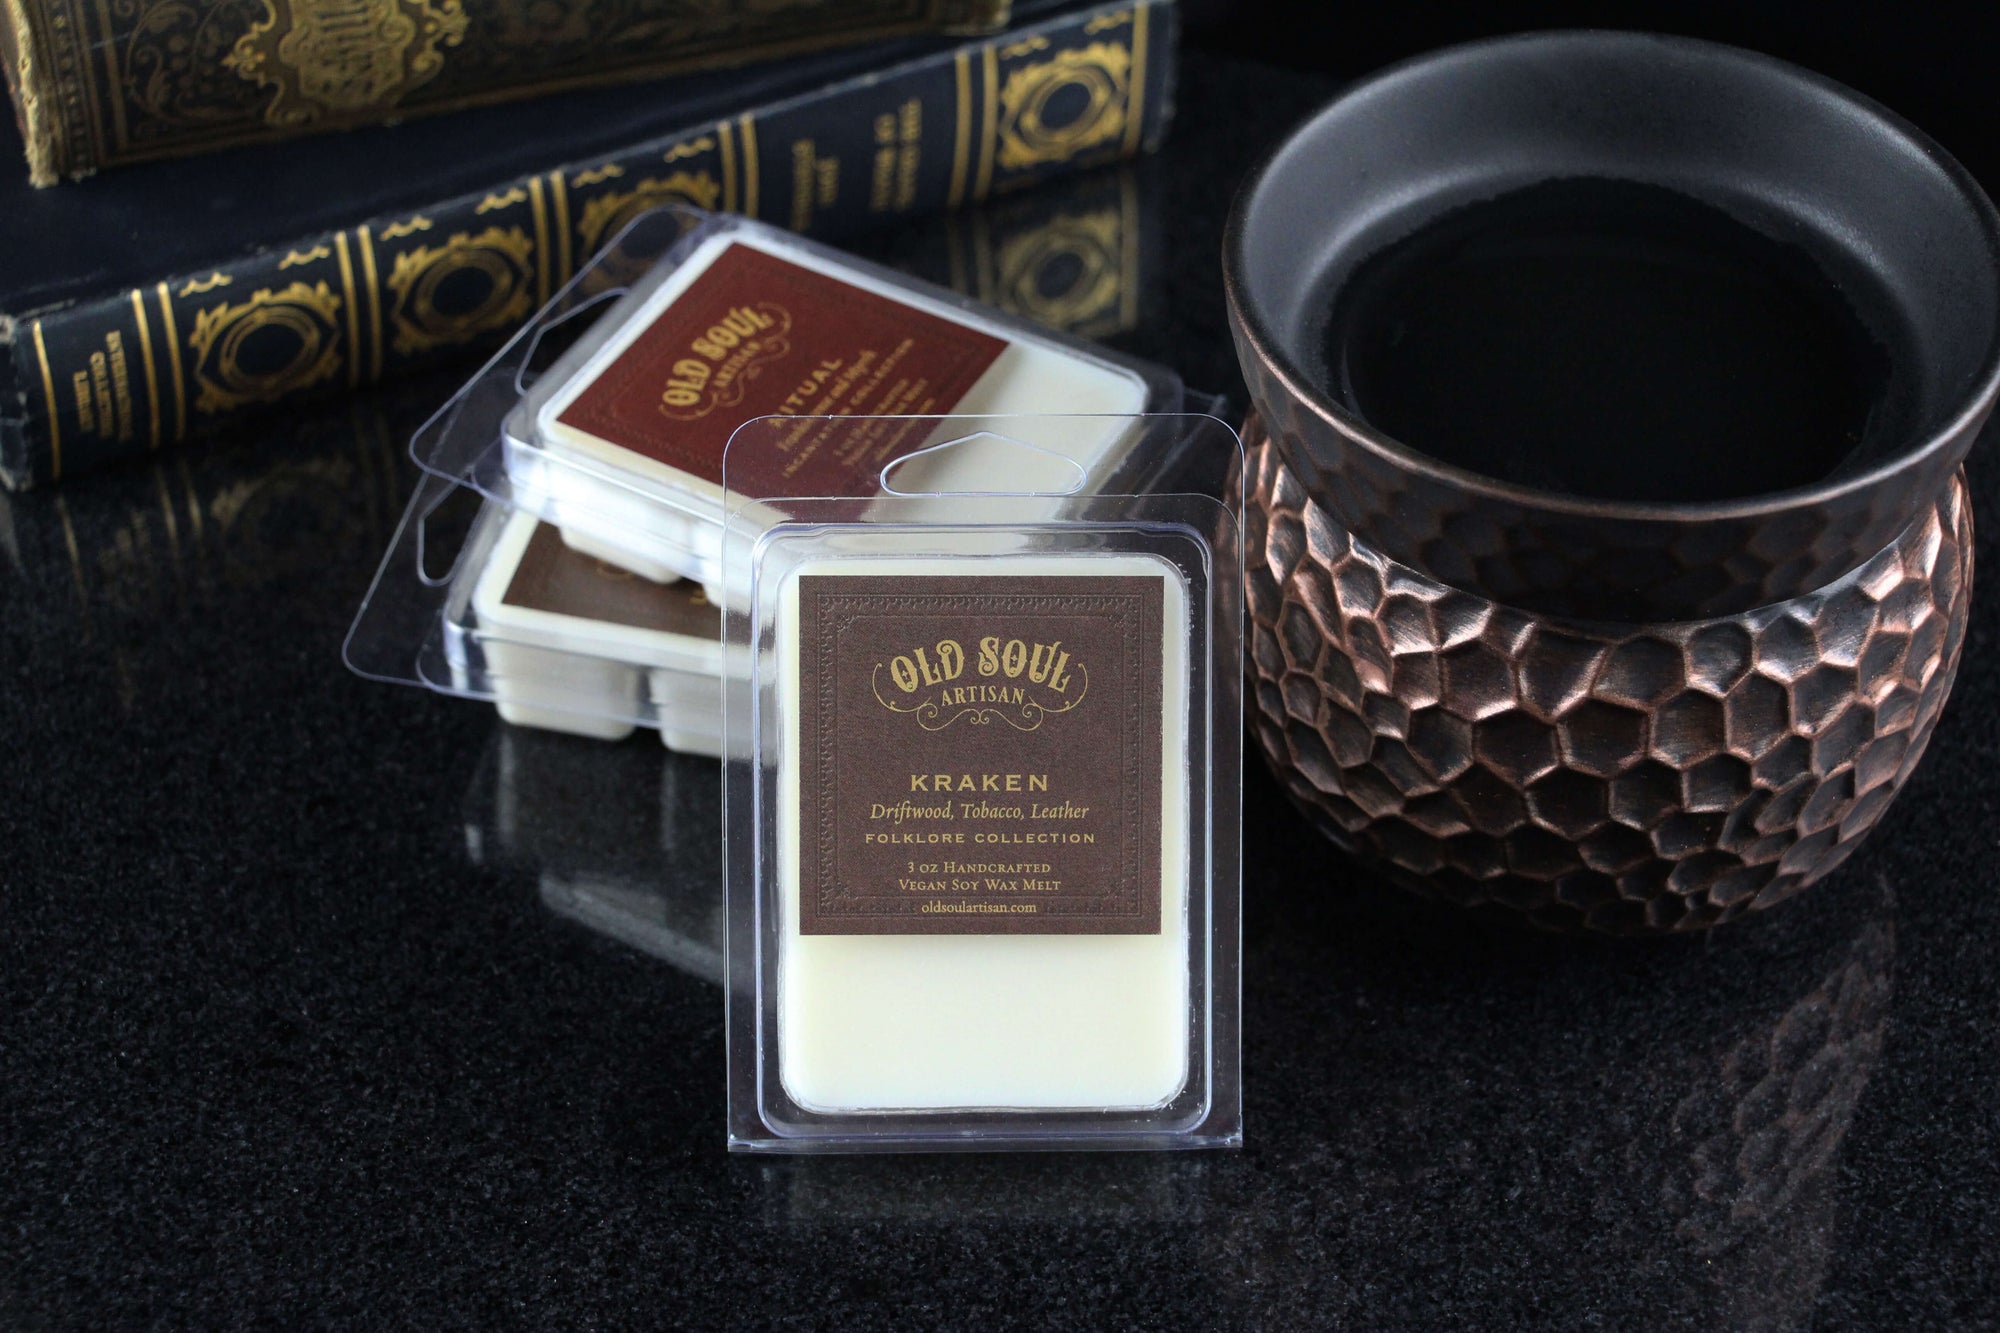 Book of Spells Wax Melts - Old Soul Artisan